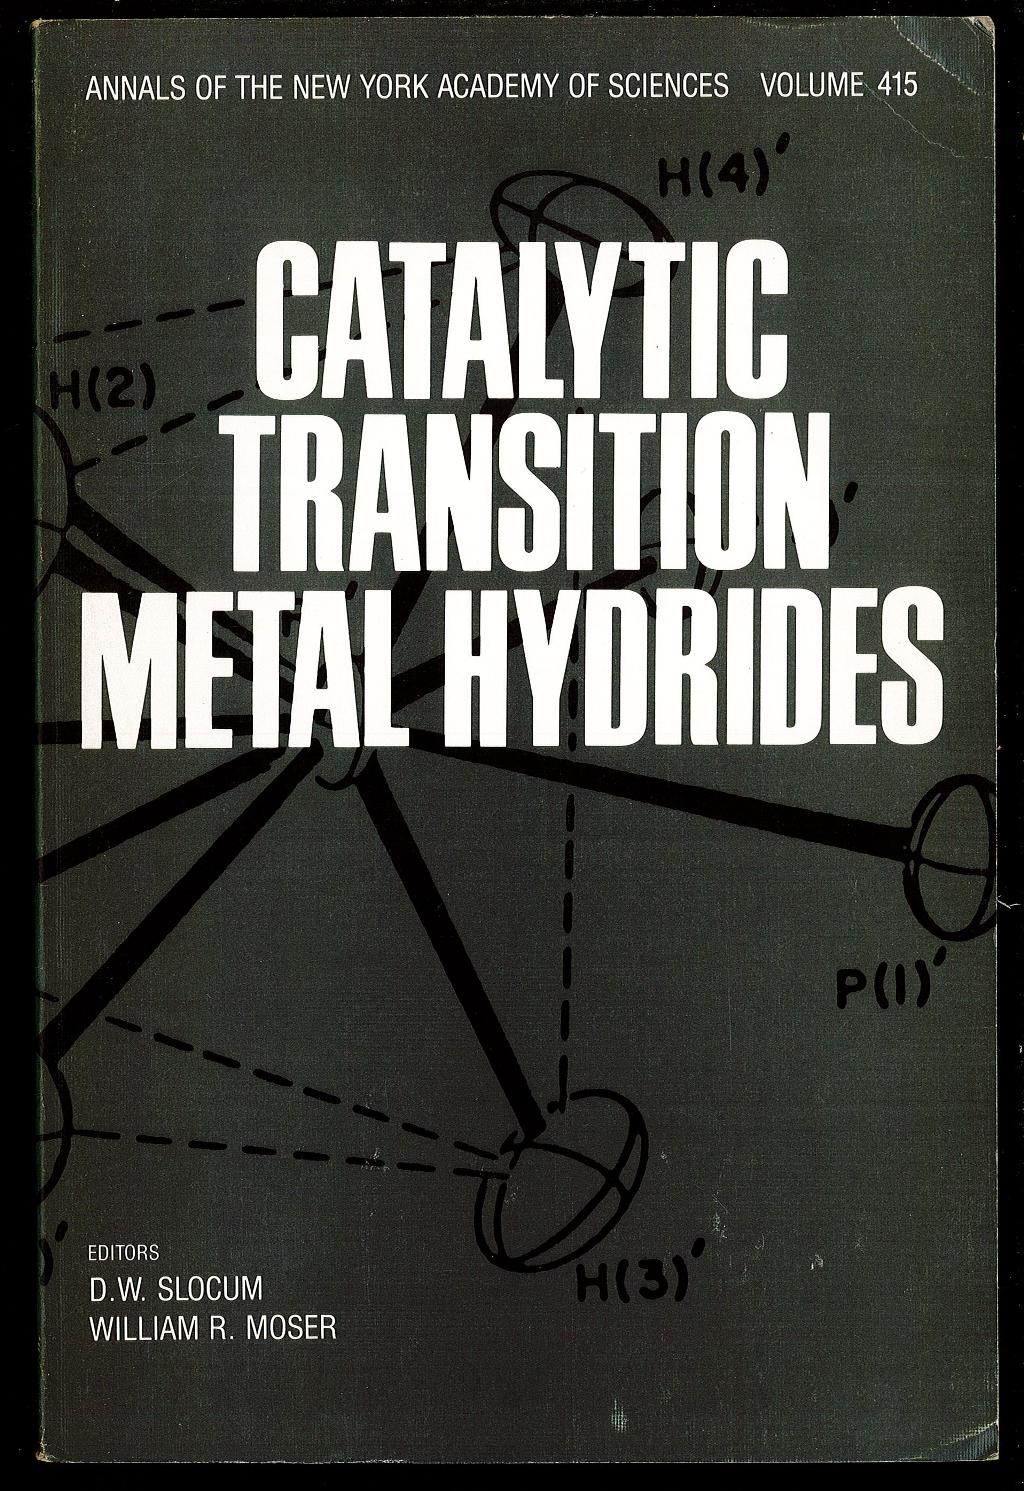 Catalytic transition metal hydrides